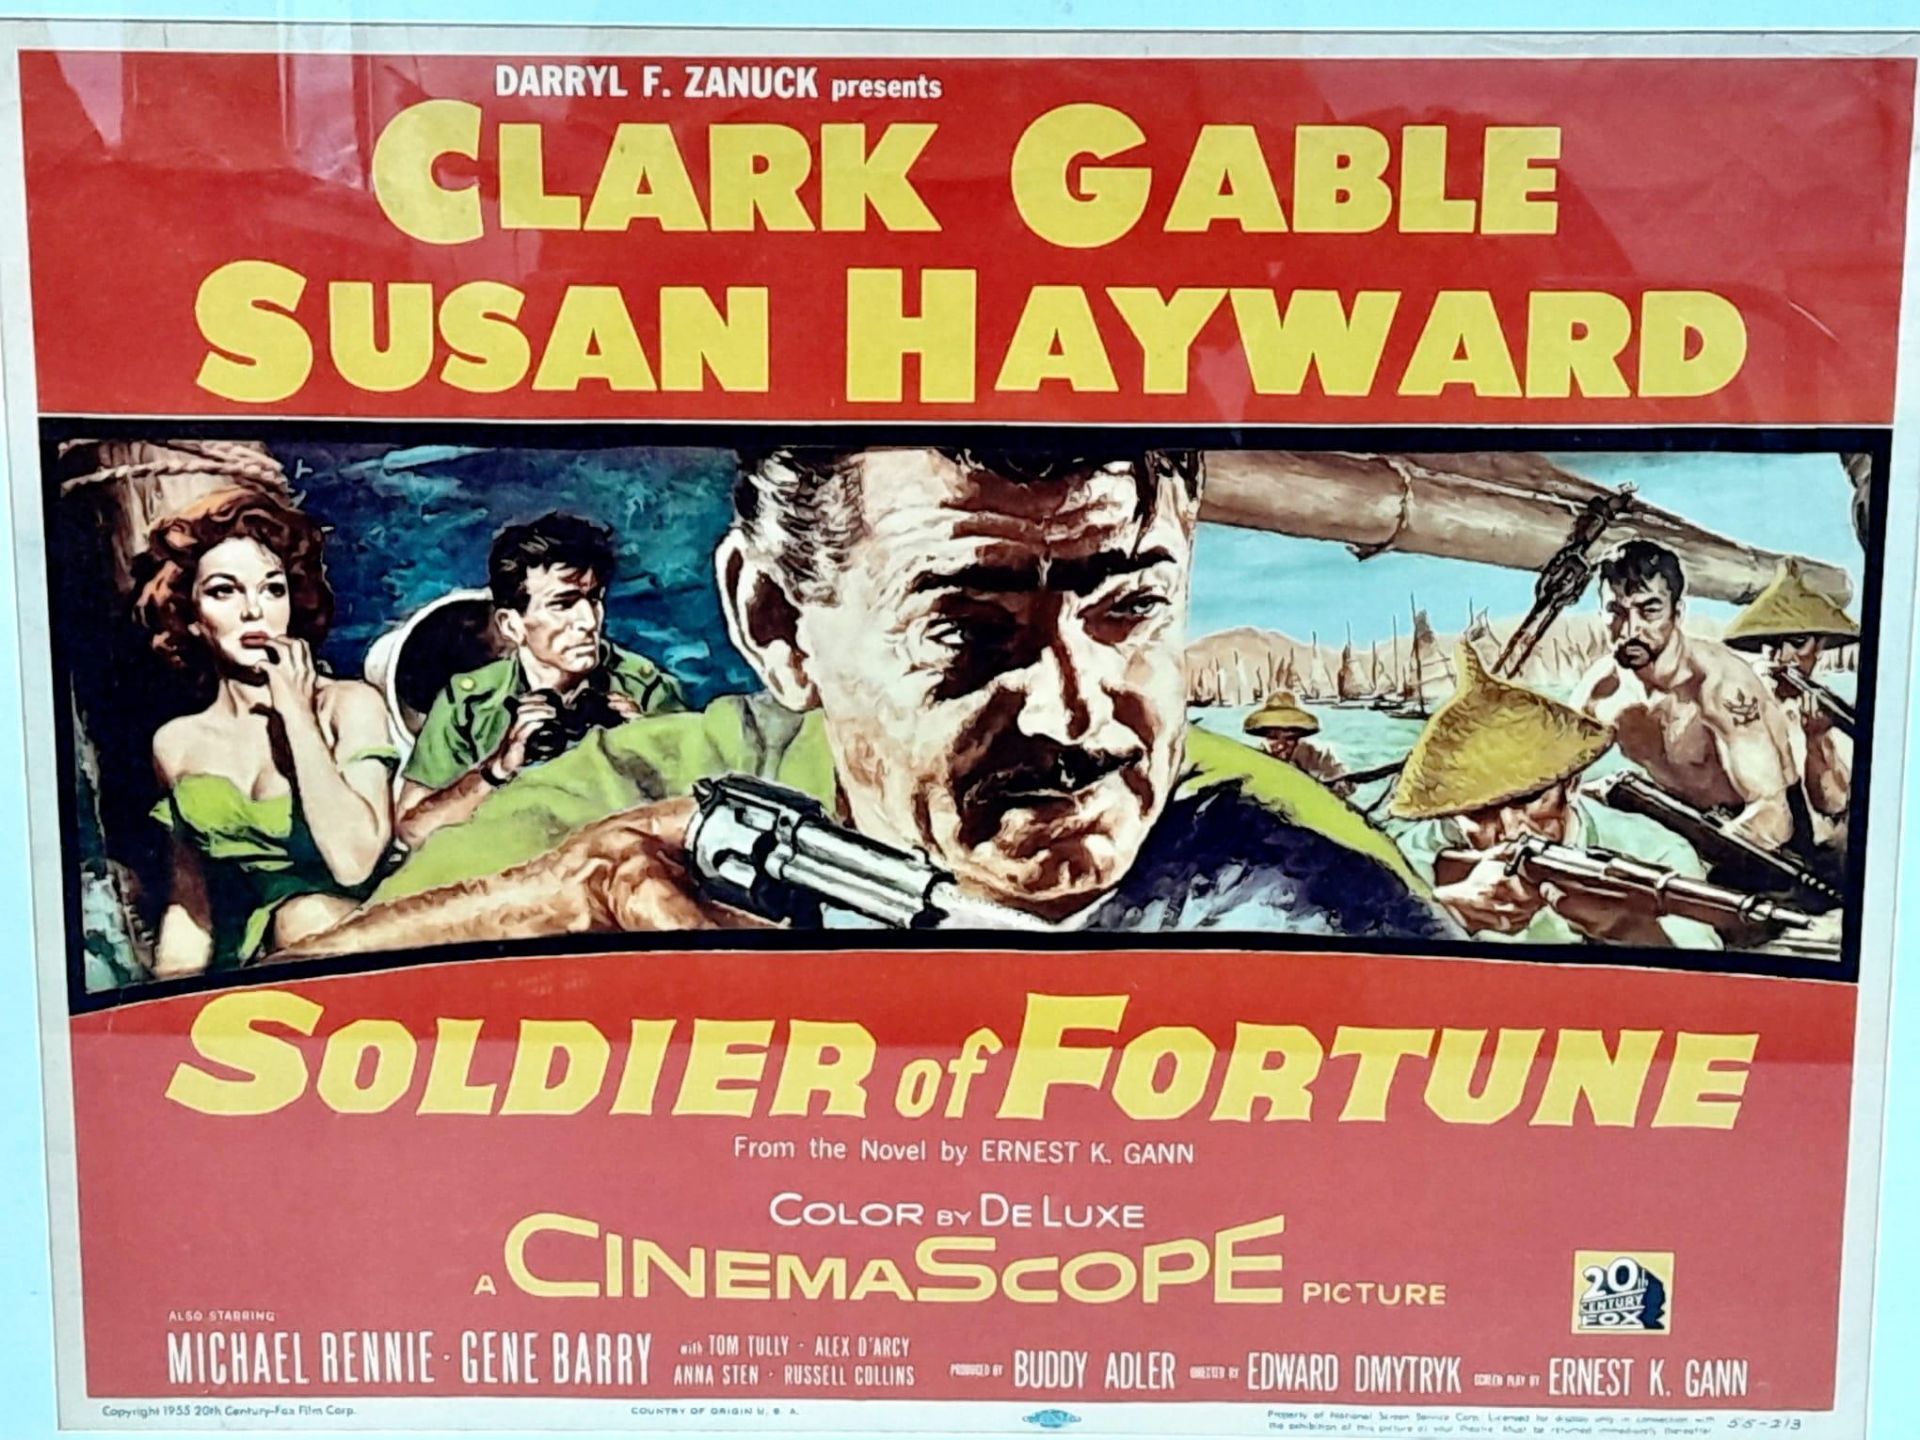 A FRAMED MOVIE POSTER FOR "SOLDIERS OF FORTUNE" STARRING CLARK GABLE AND SUSAN HAYWOOD .CIRCA 1955 . - Image 2 of 5